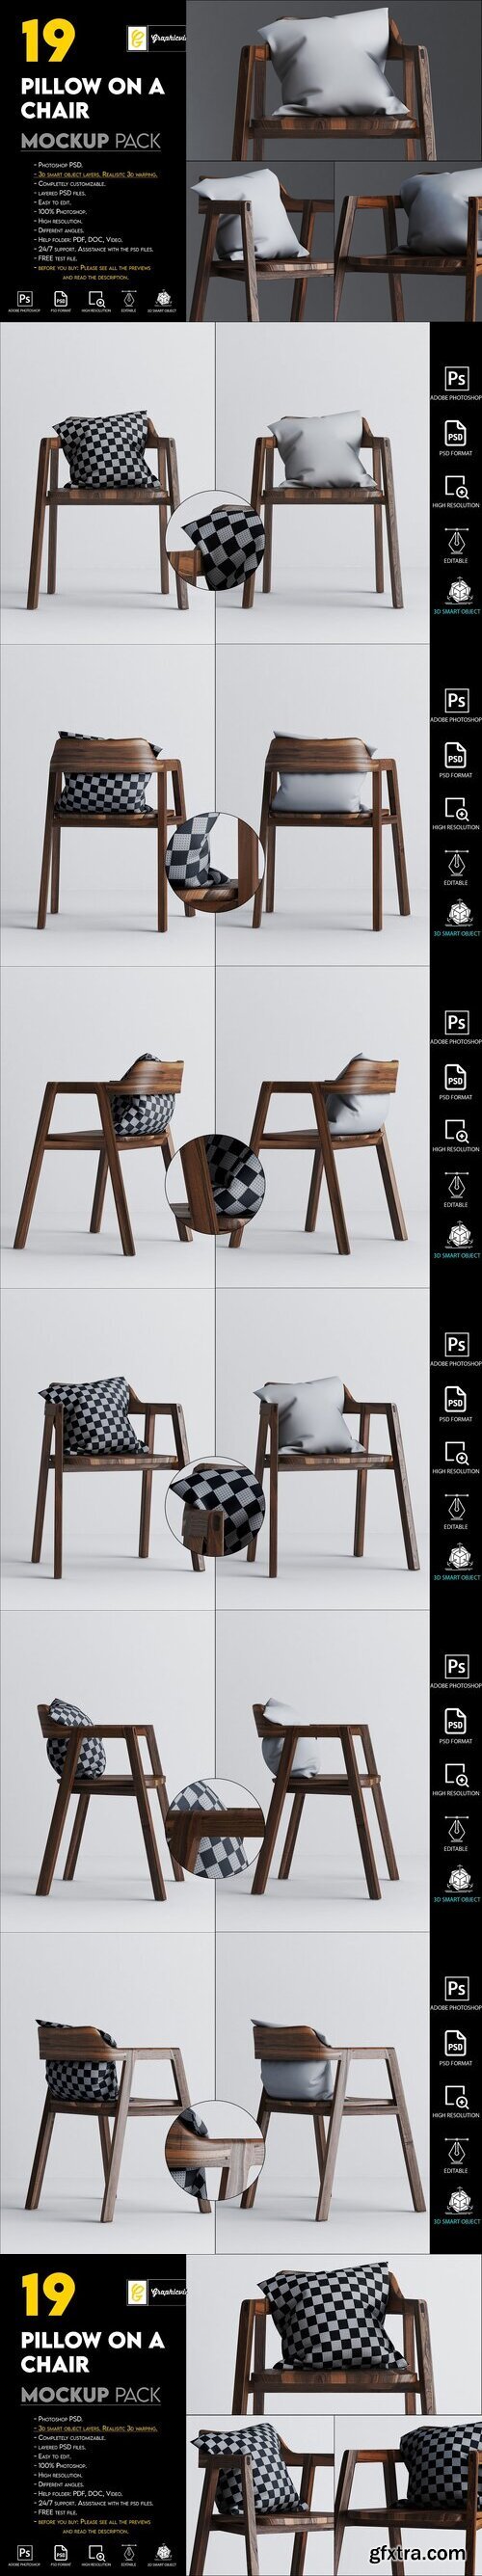 CreativeMarket - Pillow On A Chair Mockup 7193903